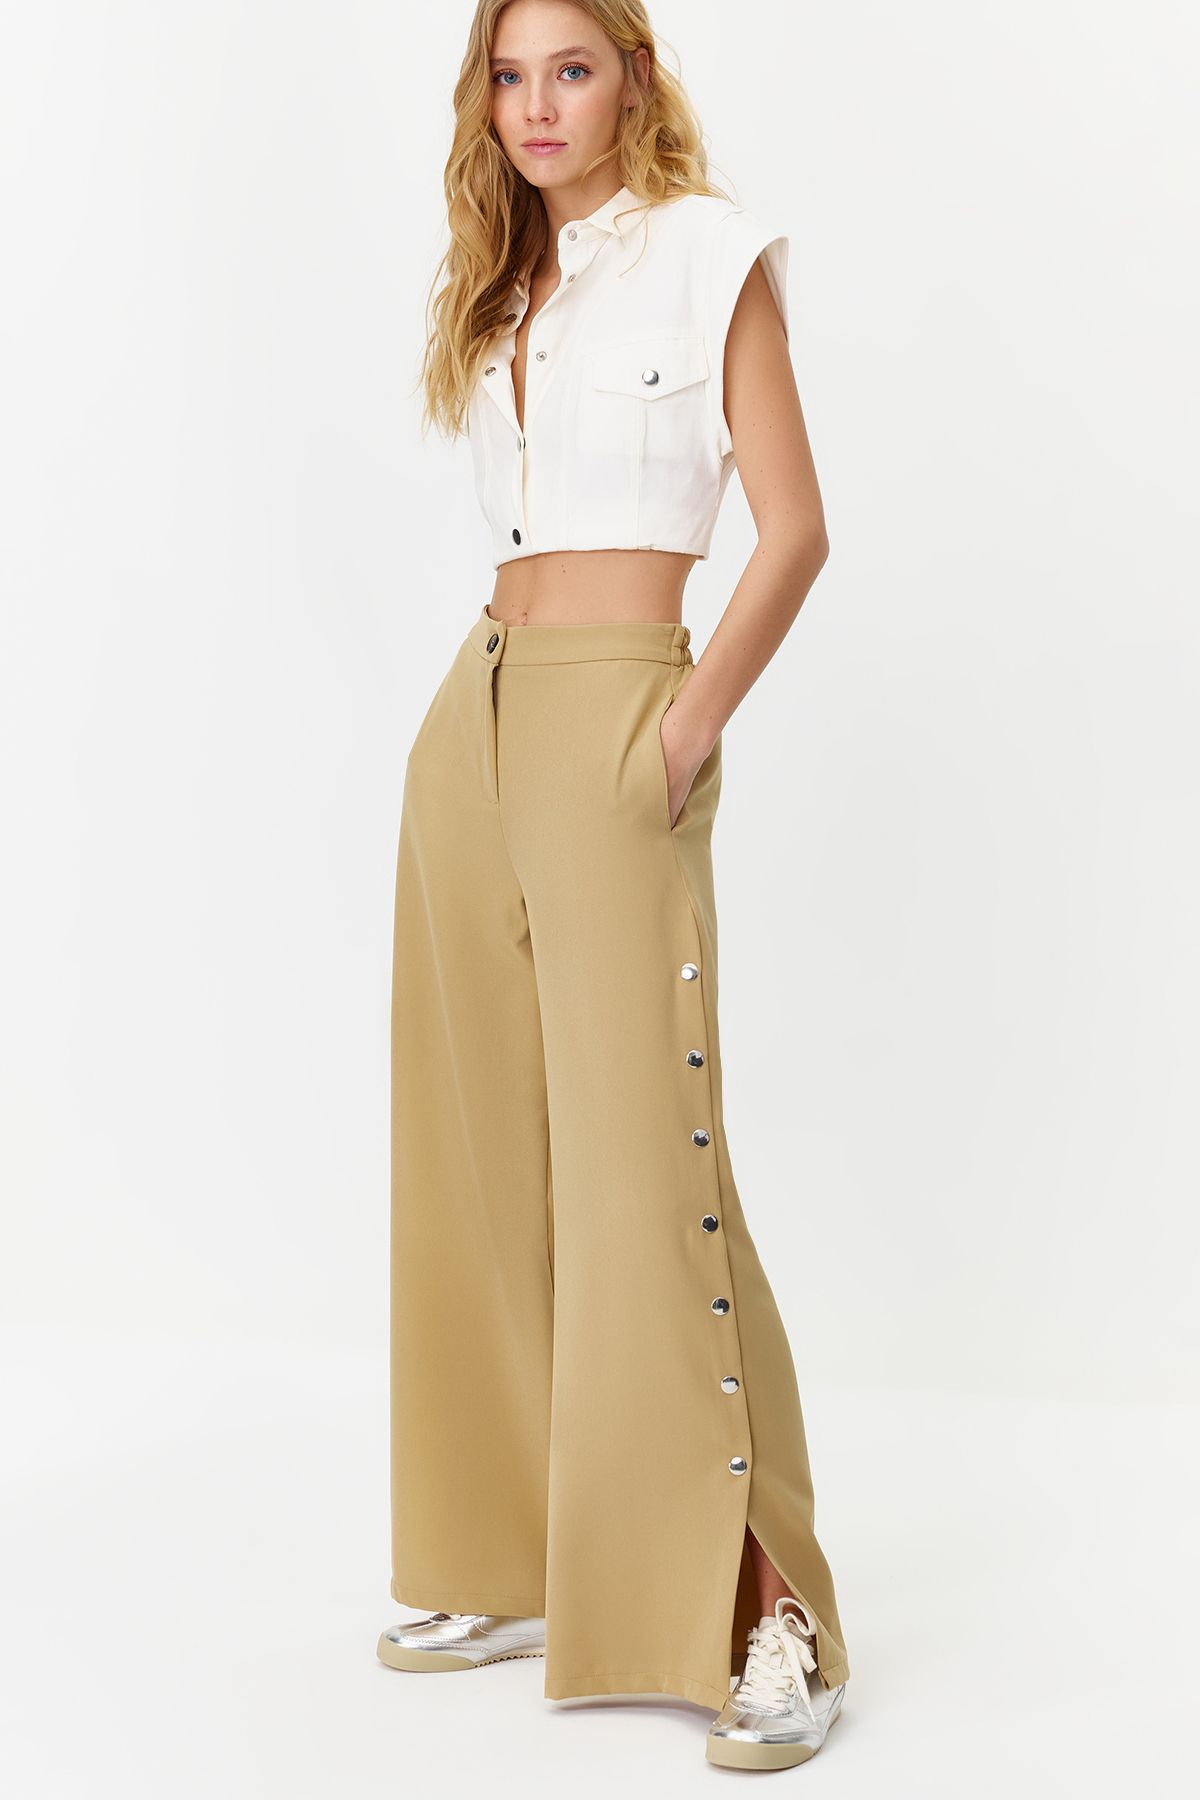 Trendyol Collection Beige Wide Leg Woven Trousers with Side Buttons  TWOSS20PL0398 - Trendyol